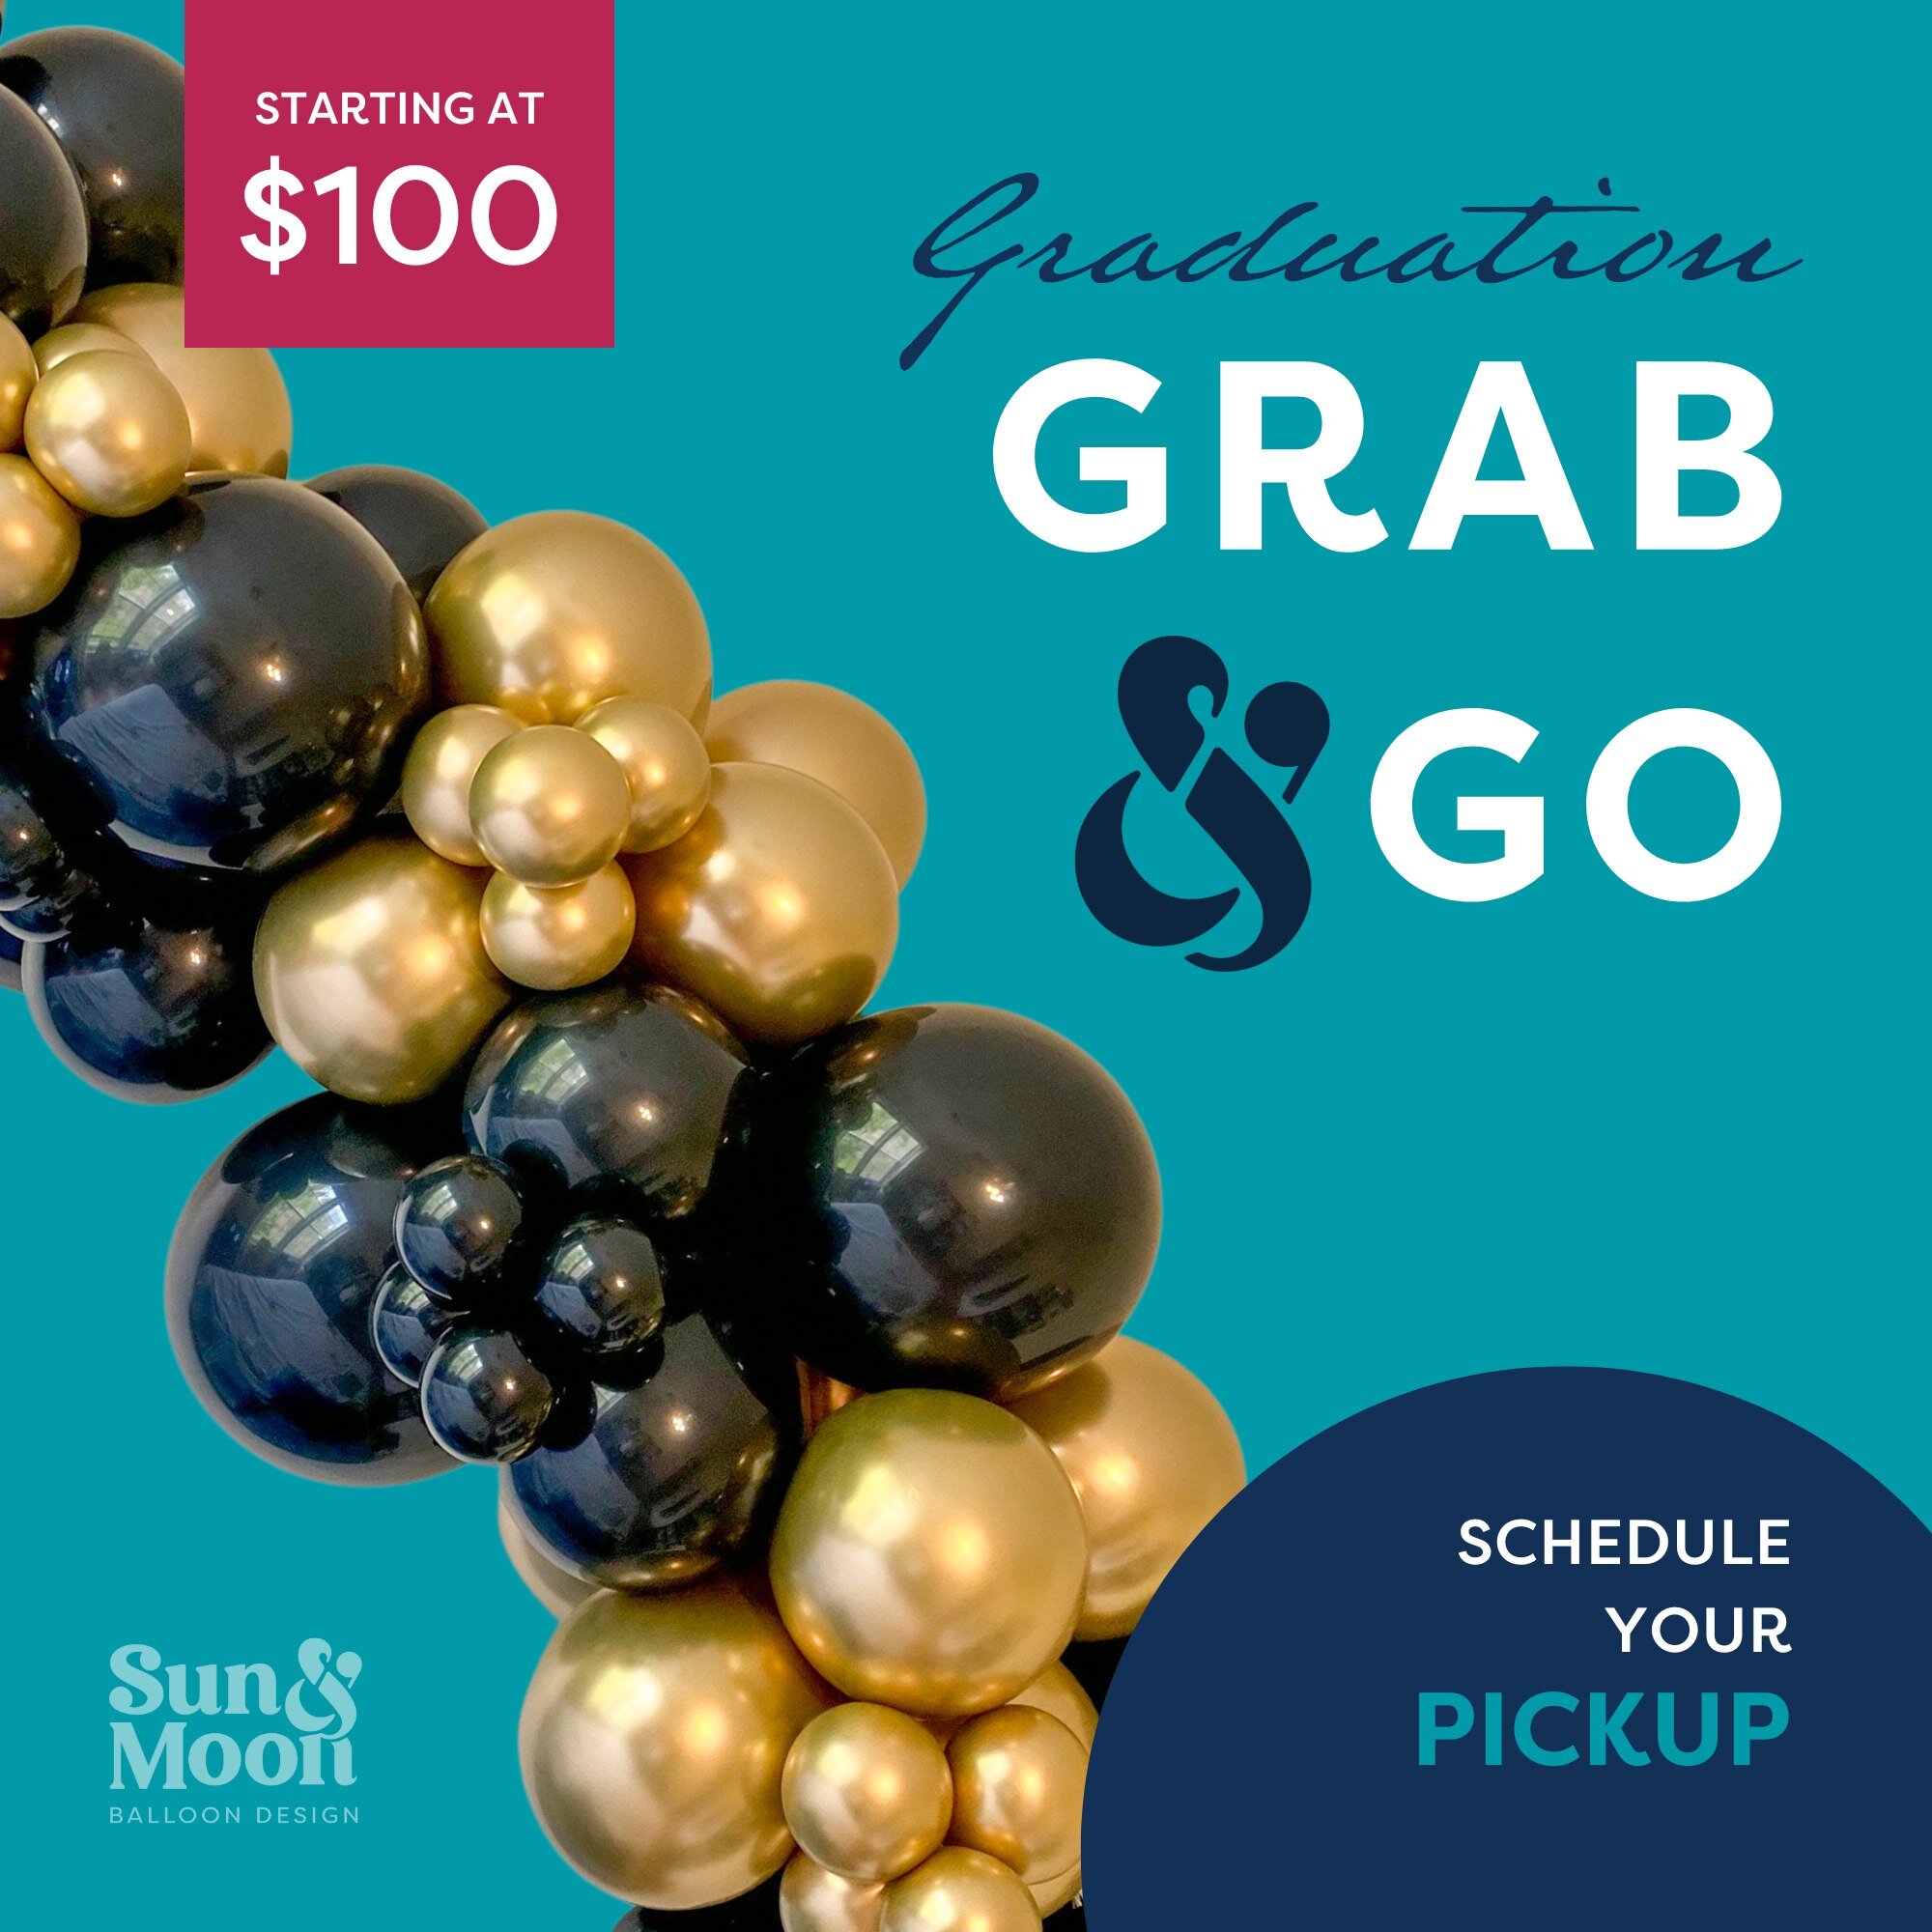 There's still time to book Graduation Grab &amp; Go balloon garlands! Pickup near TJ Middle School in Frederick. Link in bio to order